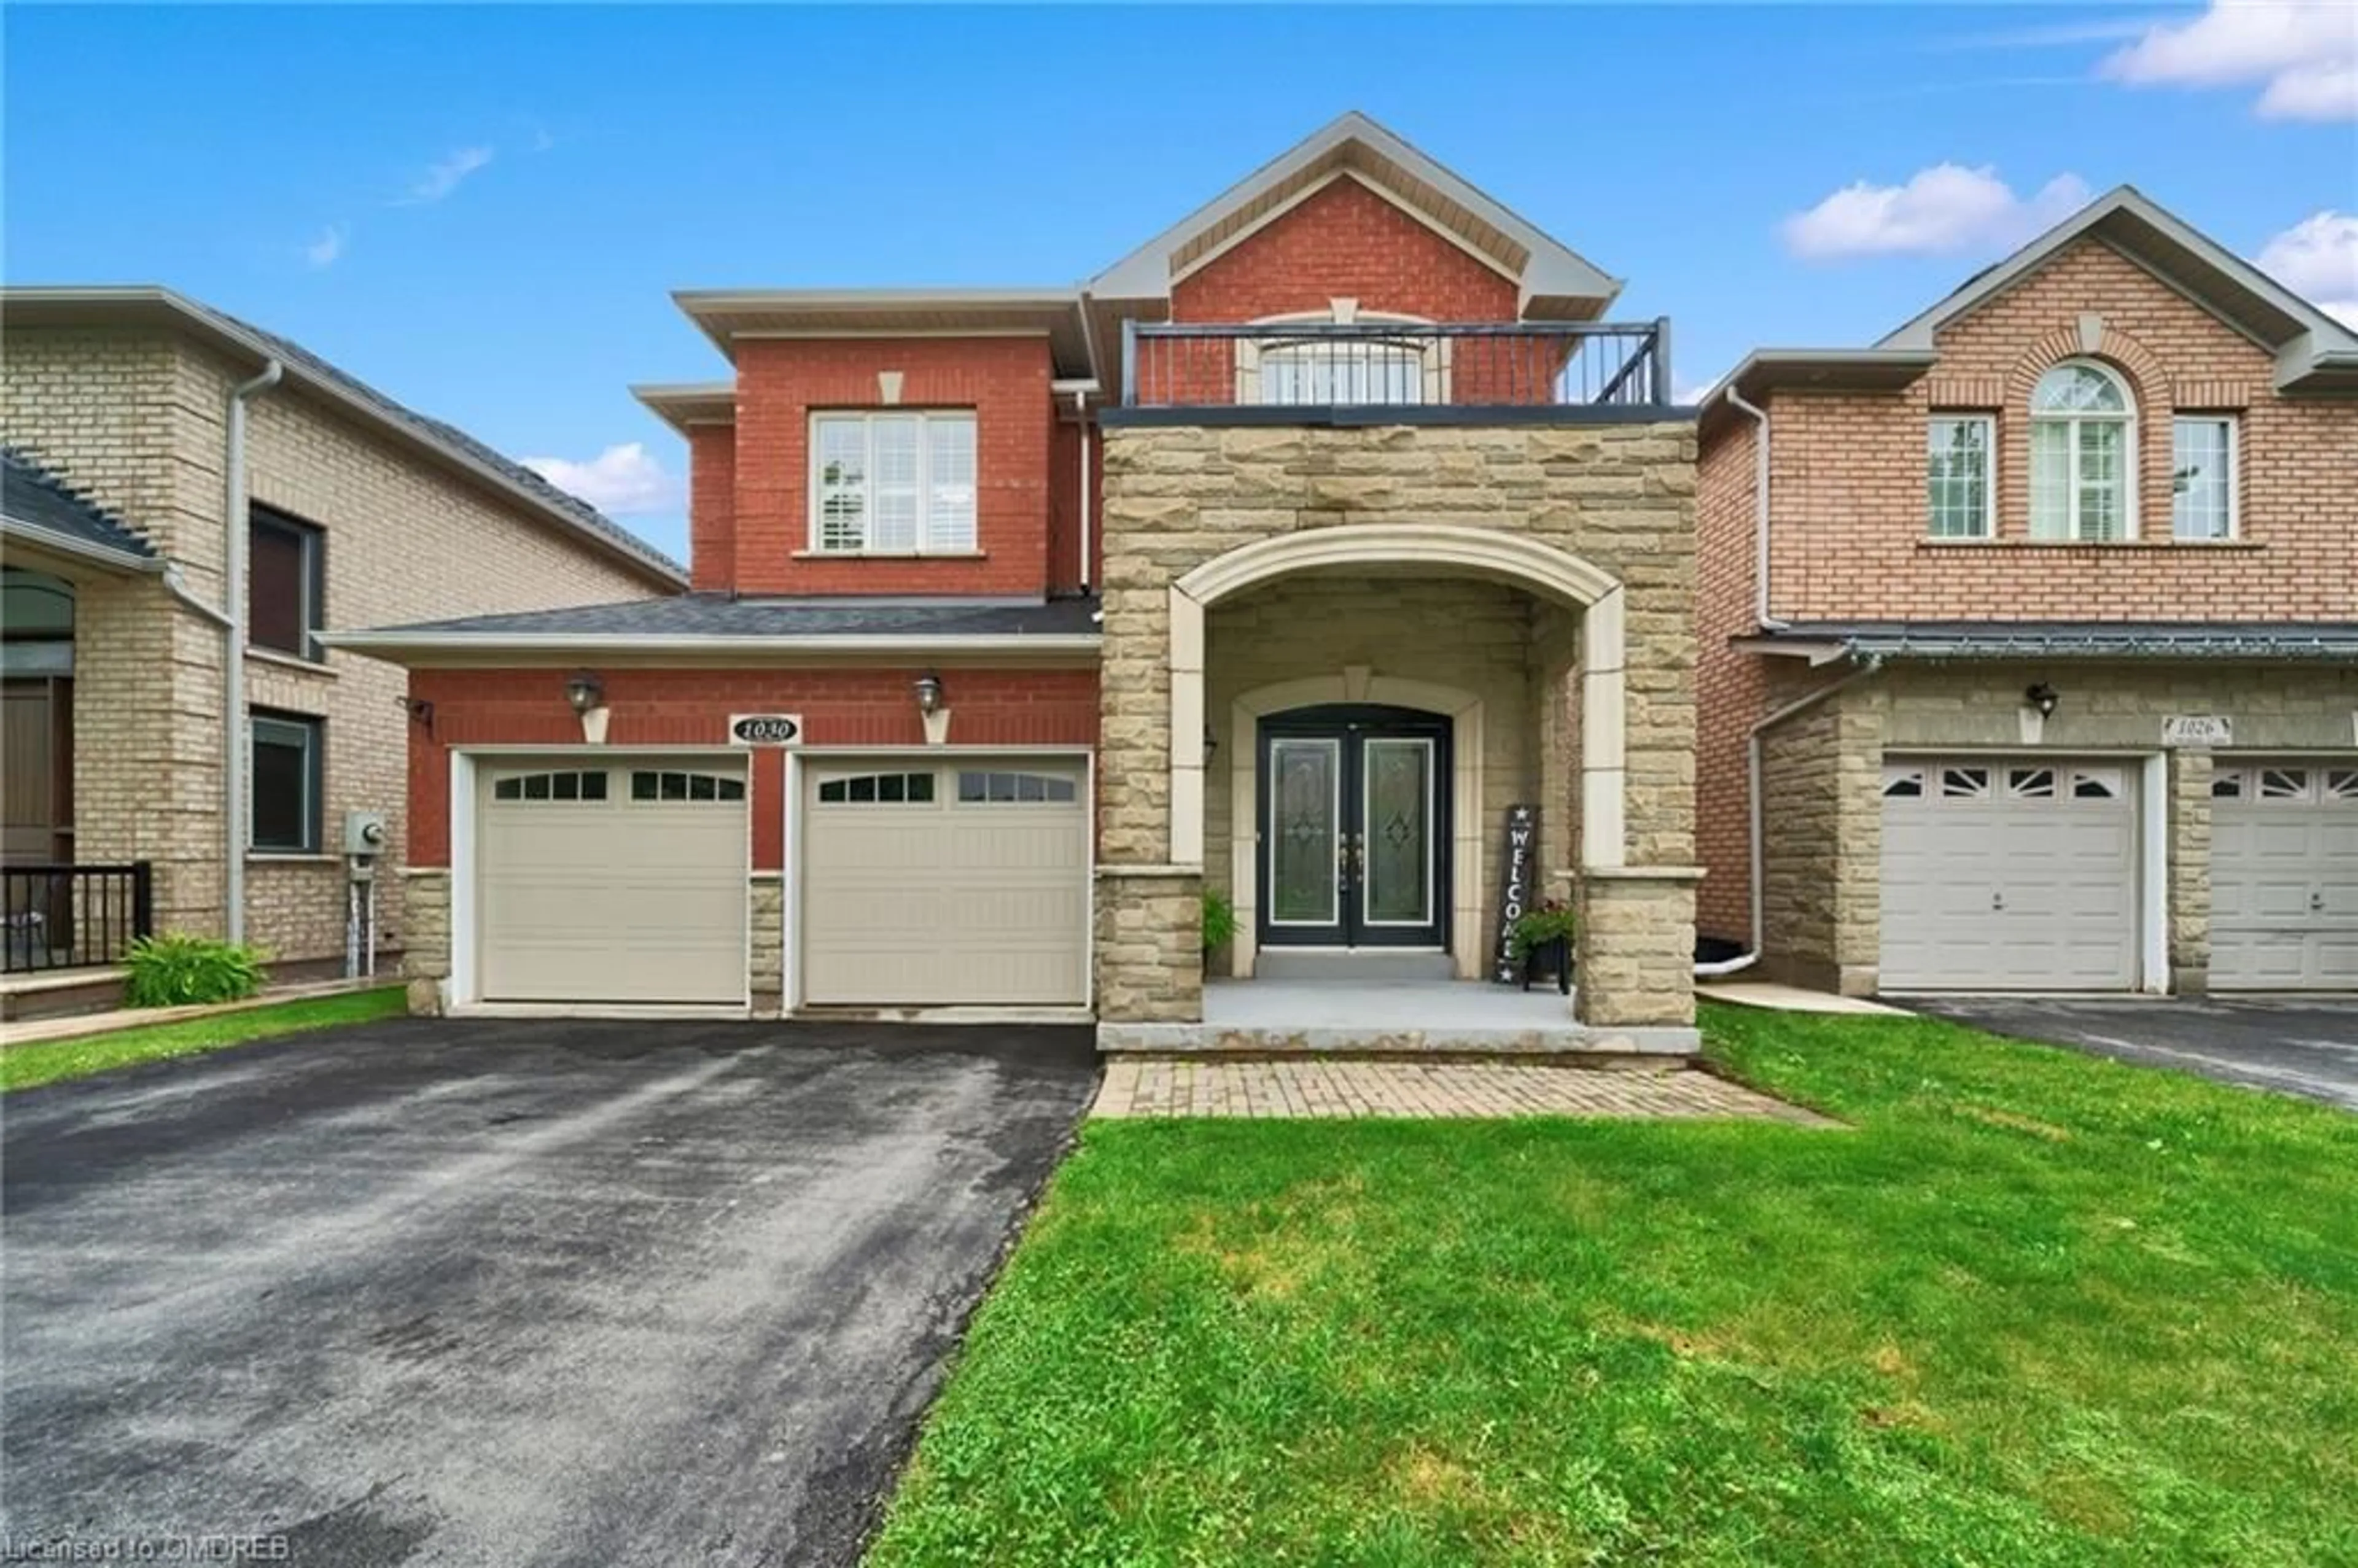 Home with brick exterior material for 1030 Lonsdale Lane, Oakville Ontario L6H 7L5